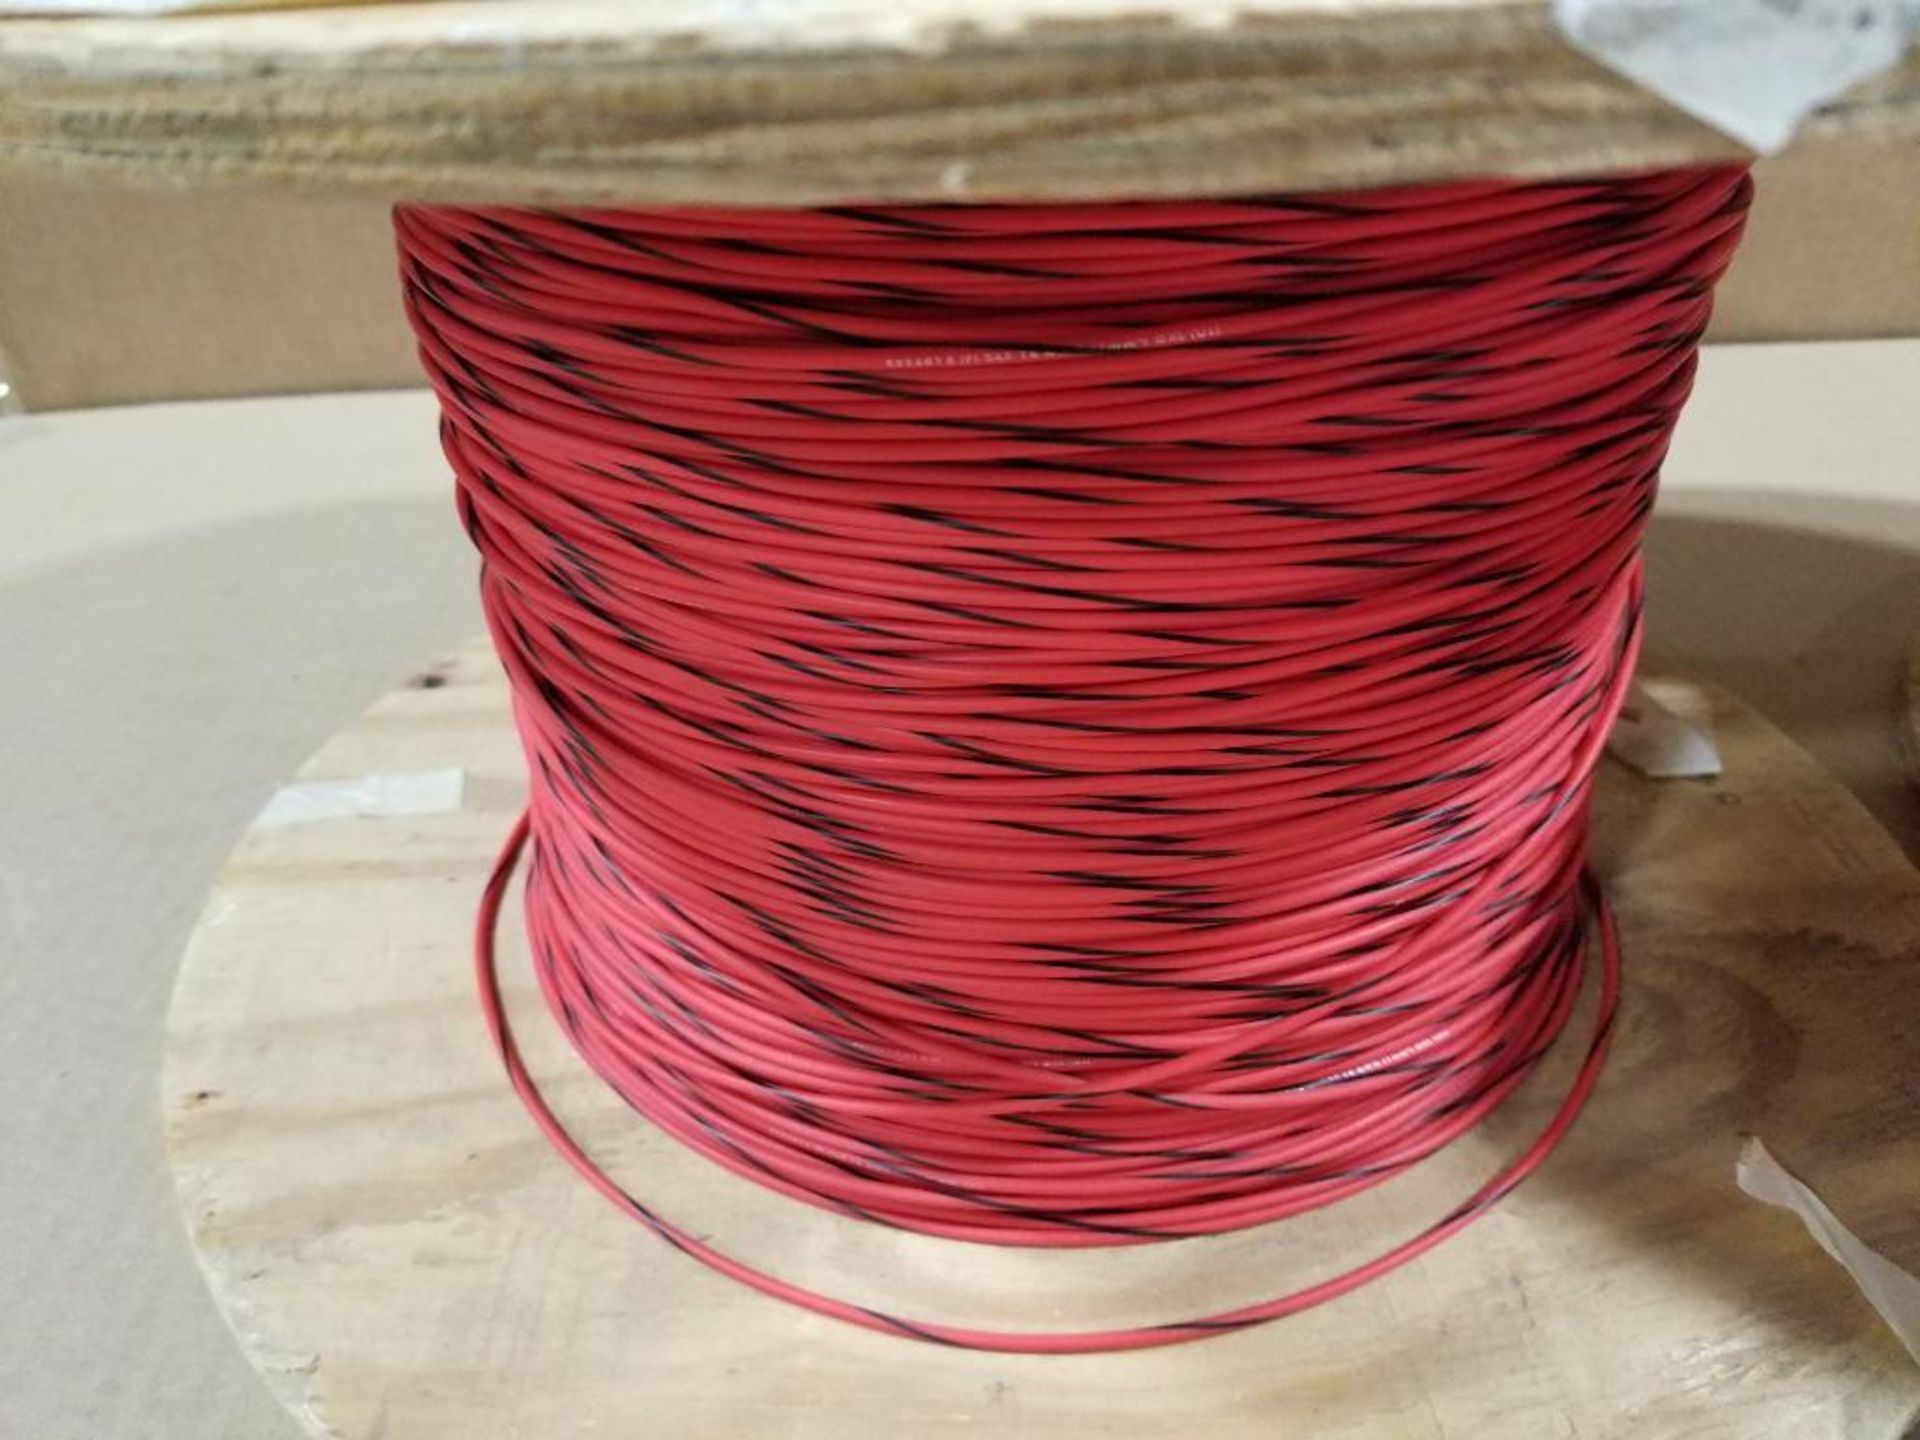 Qty 2 - 16 and 12 awg  assorted color copper wire. 44lbs total gross combined weight for all rolls. - Image 2 of 7